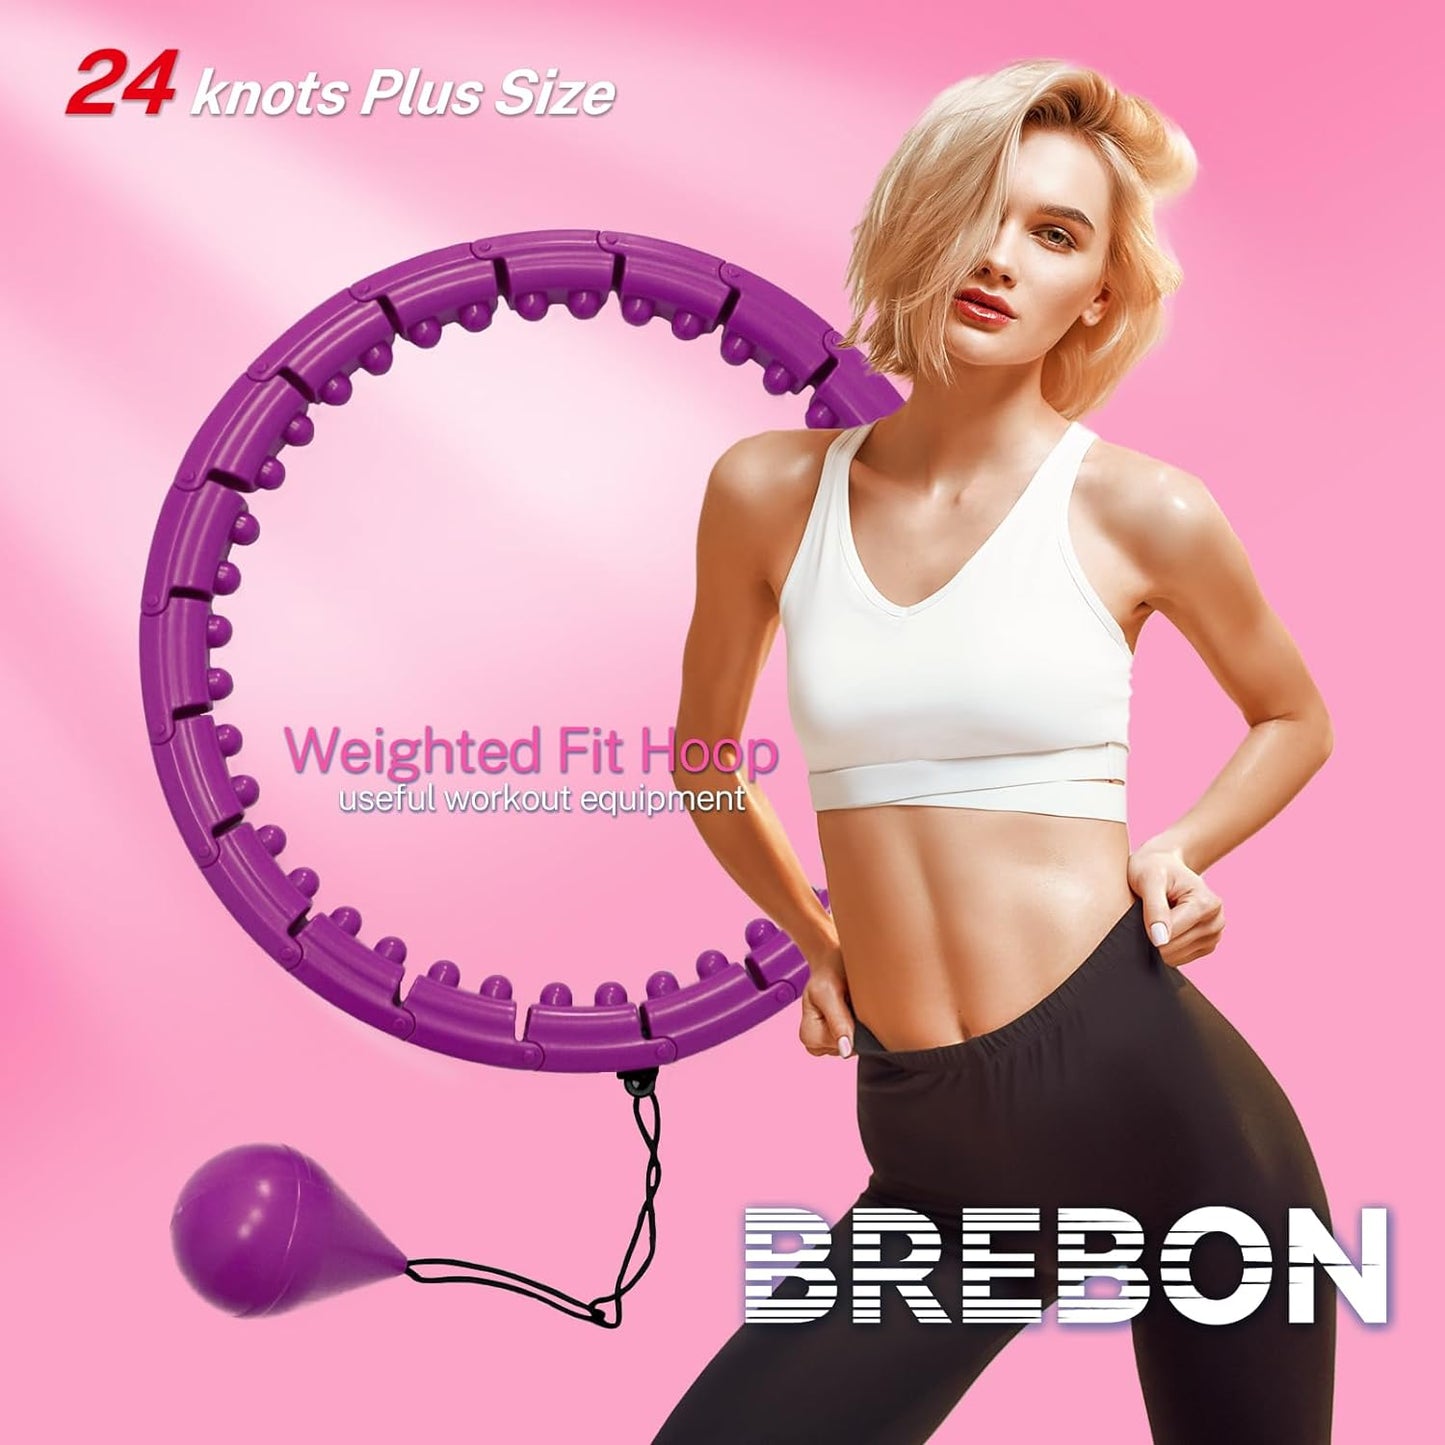 Weighted Hoola Exercise Fit Hoops plus Size for Weight Loss, 2 in 1 Weight Loss 24 Detachable Knots Fitness Abdomen Equipment Hoops Adjustable Auto-Spinning Ball for Adult